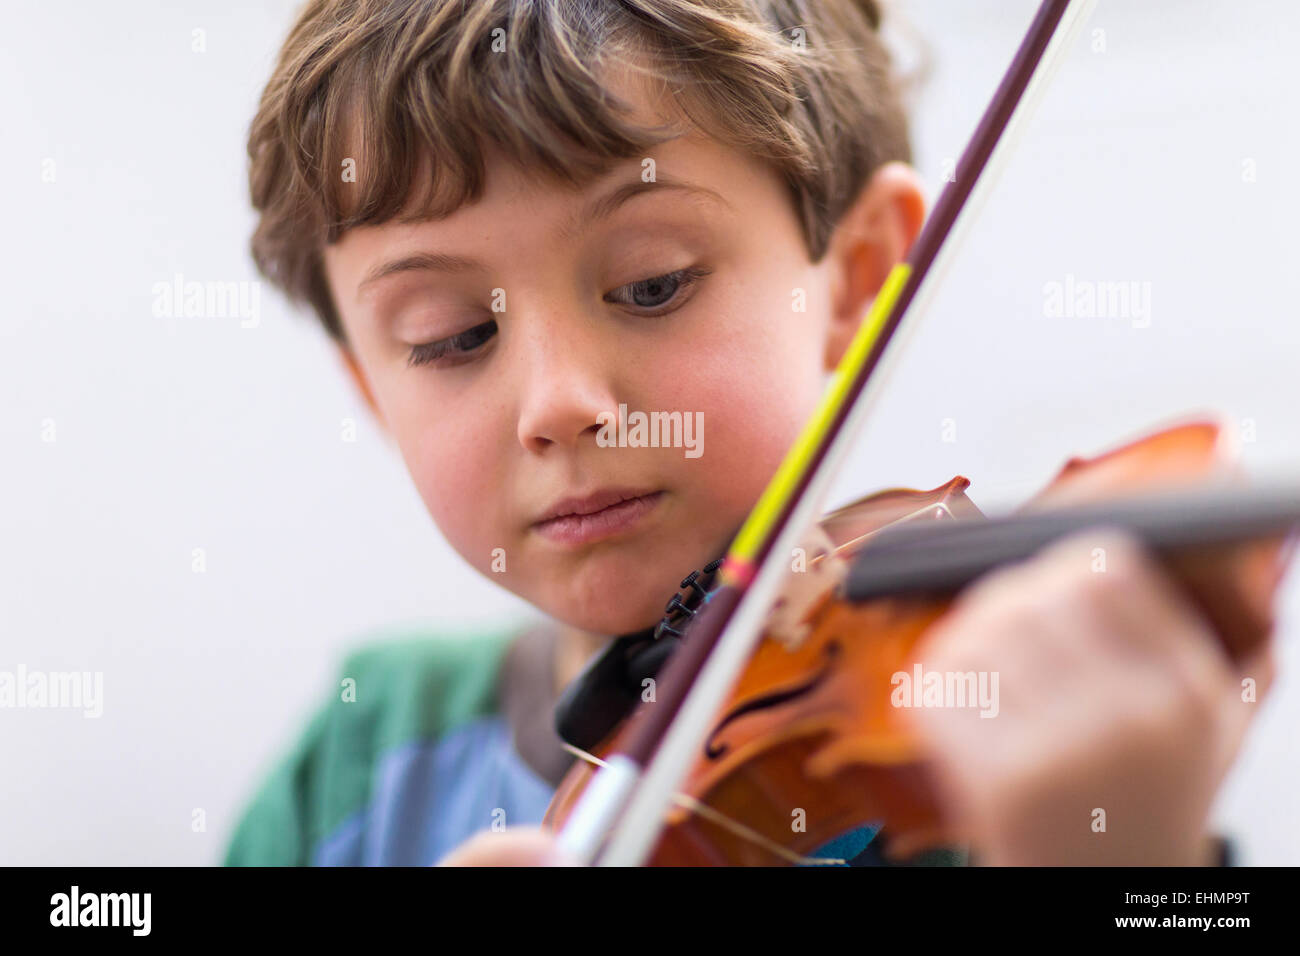 Close up of boy playing violin Banque D'Images